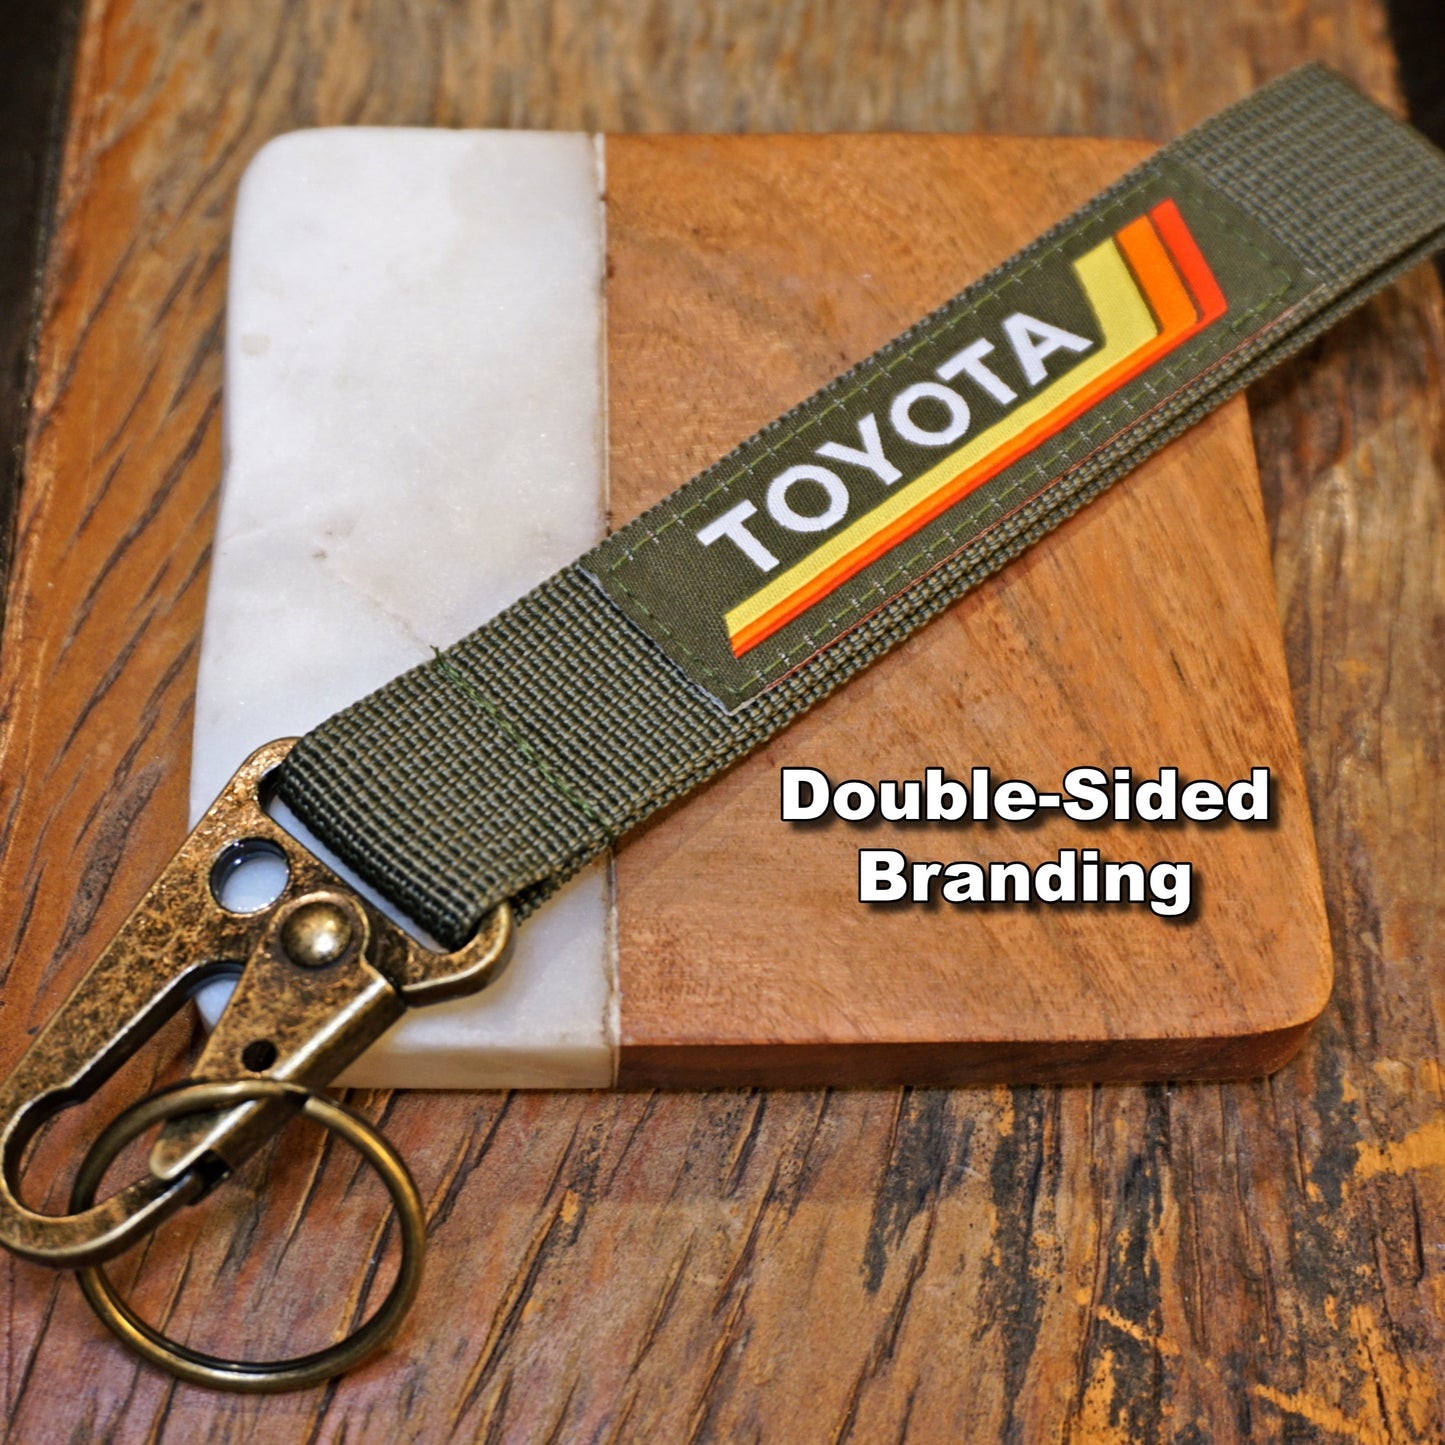 Vintage Heritage Stripes Keychain for Toyota, Green, Antique Brass Metal Clip Accessory